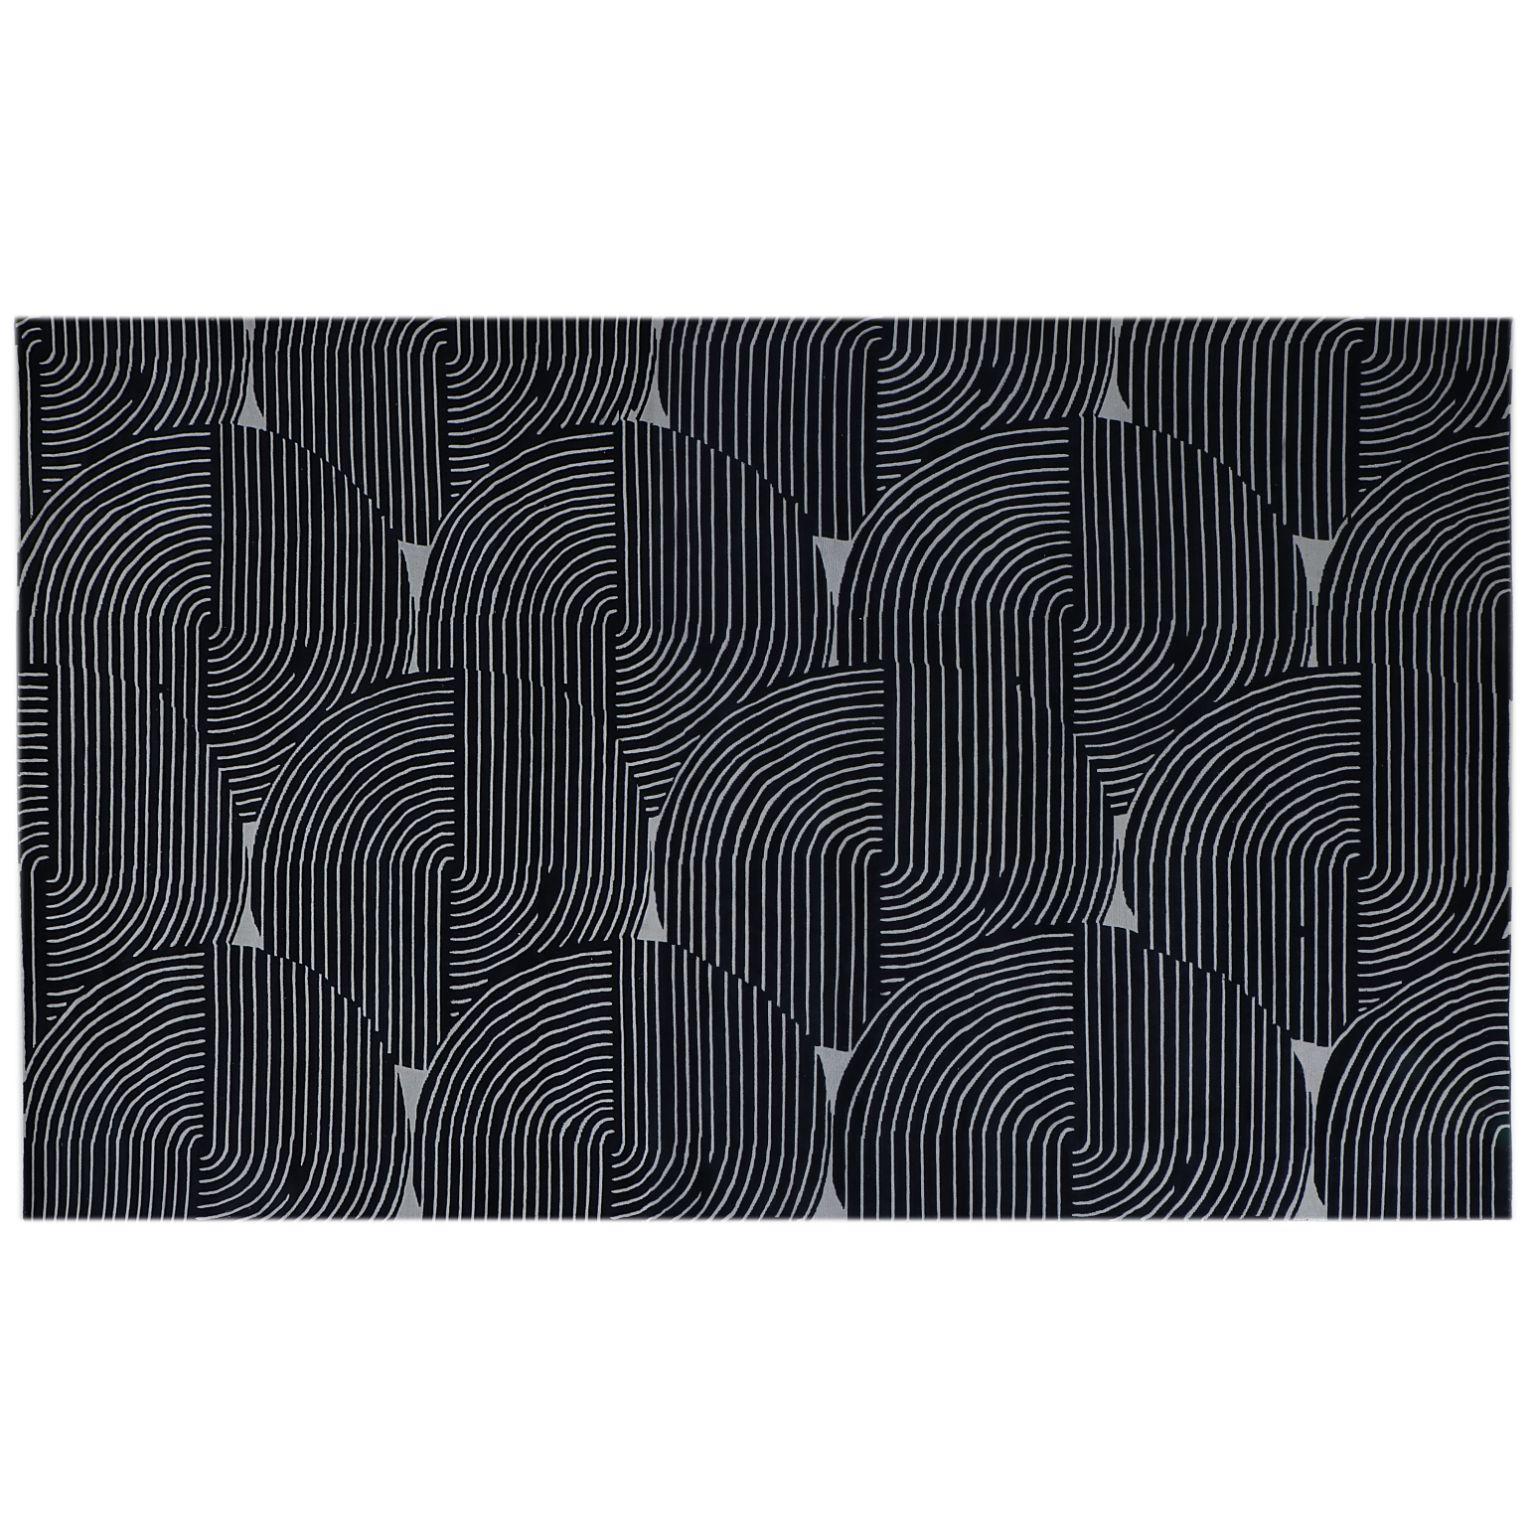 Nightcap large rug by Art & Loom
Dimensions: D304.8 x H426.7 cm
Materials: New Zealand wool & Chinese silk
Quality (Knots per Inch): 100
Also available in different dimensions.

Samantha Gallacher has always had a keen eye for aesthetics, drawing